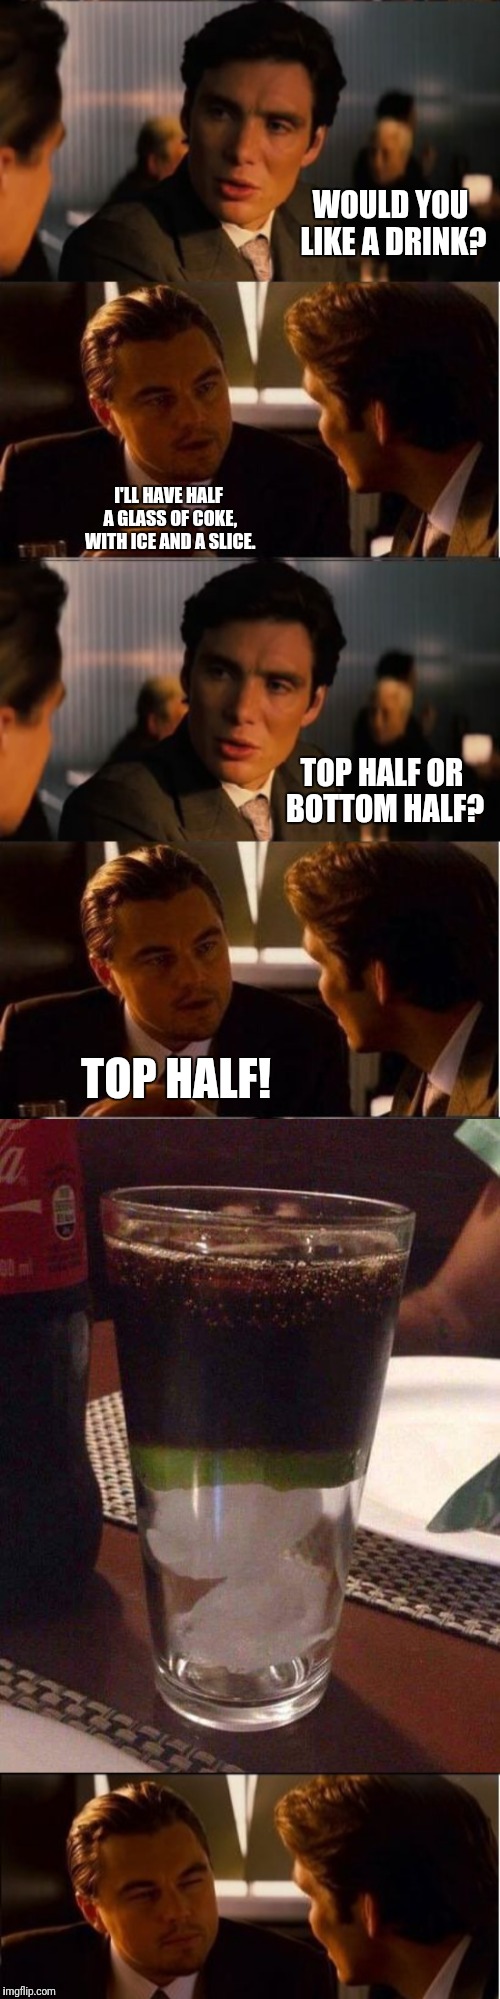 Glass Half Full | WOULD YOU LIKE A DRINK? I'LL HAVE HALF A GLASS OF COKE, WITH ICE AND A SLICE. TOP HALF OR BOTTOM HALF? TOP HALF! | image tagged in funny,memes,inception | made w/ Imgflip meme maker